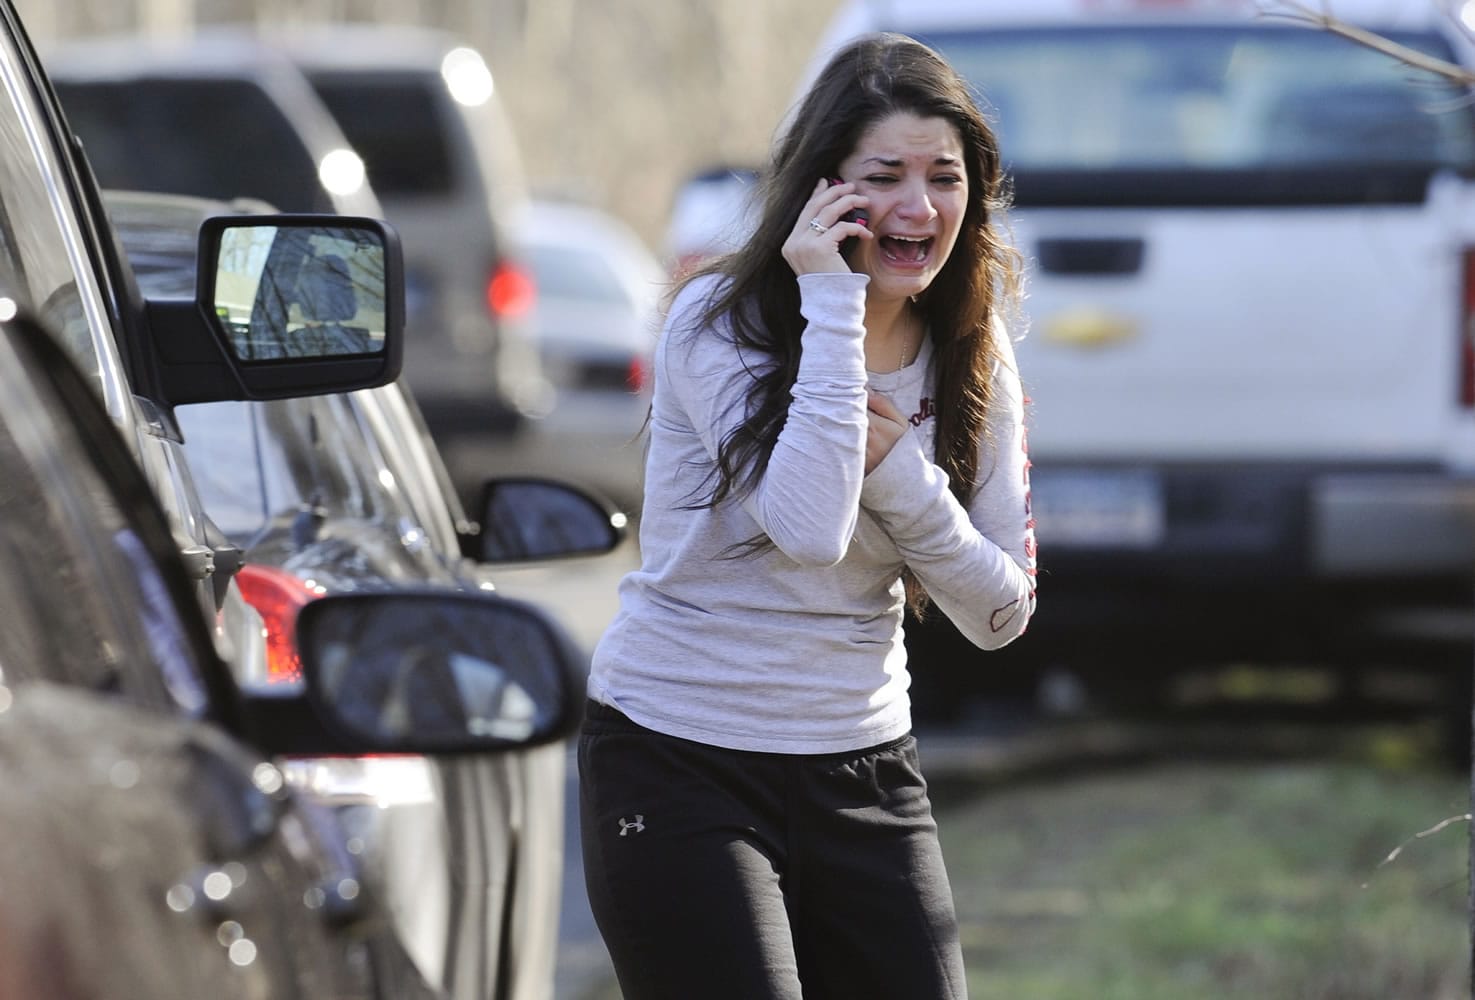 Carlee Soto uses a phone Dec. 14, 2012, to ask about her sister, Victoria Soto, a teacher at the Sandy Hook Elementary School in Newtown, Conn., after gunman Adam Lanza killed 26 people inside the school, including 20 children. Victoria Soto, 27, was among those killed.